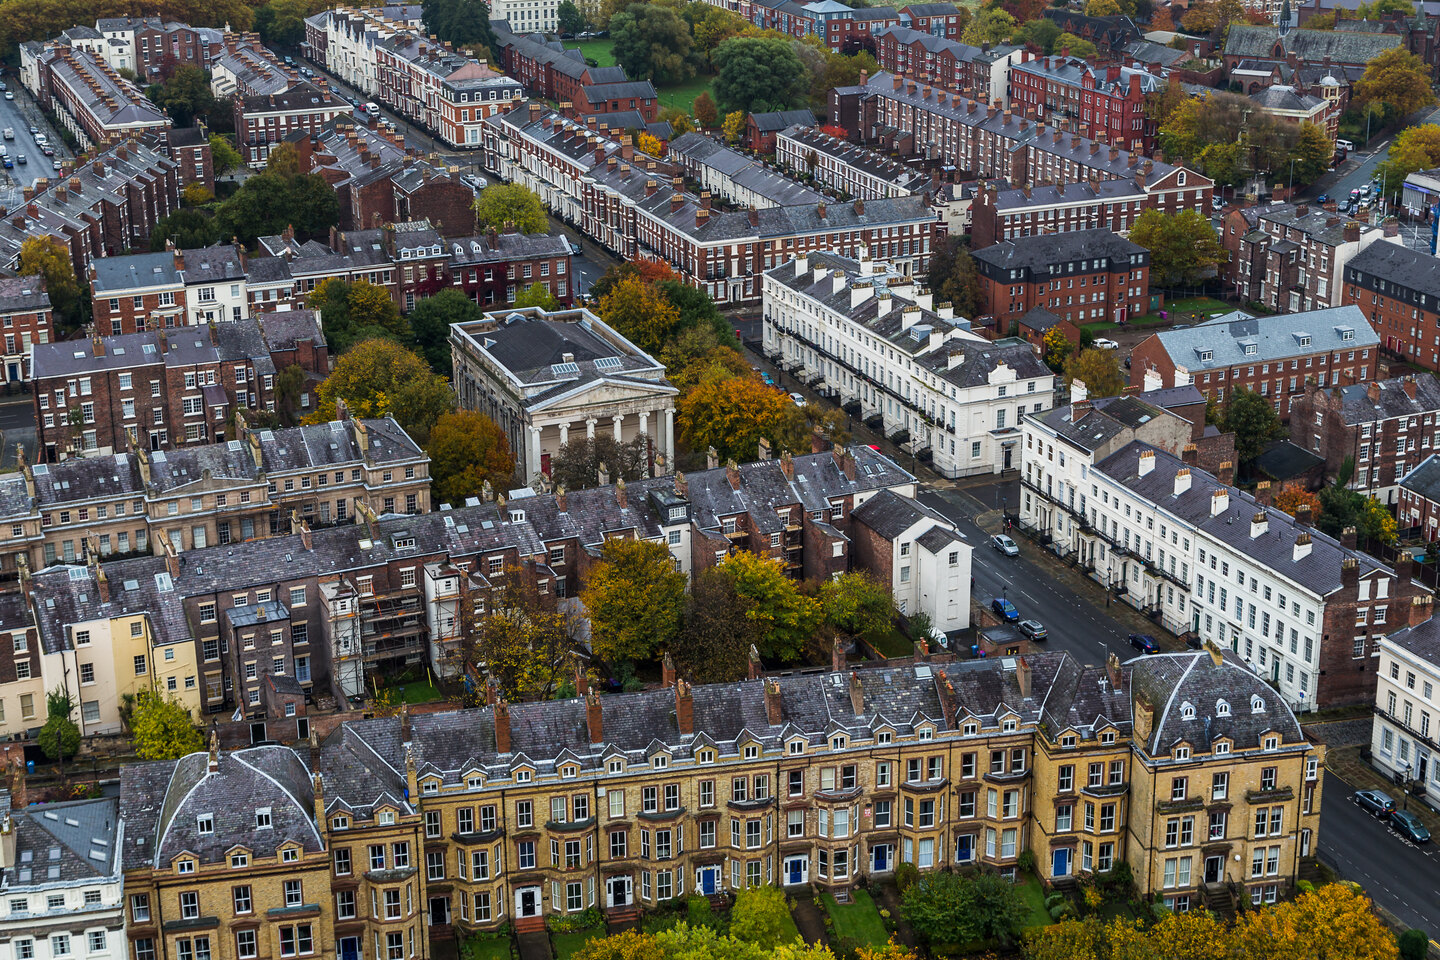 Student Accommodation in Georgian Quarter, Liverpool - aerial view of houses in the Georgian Quarter